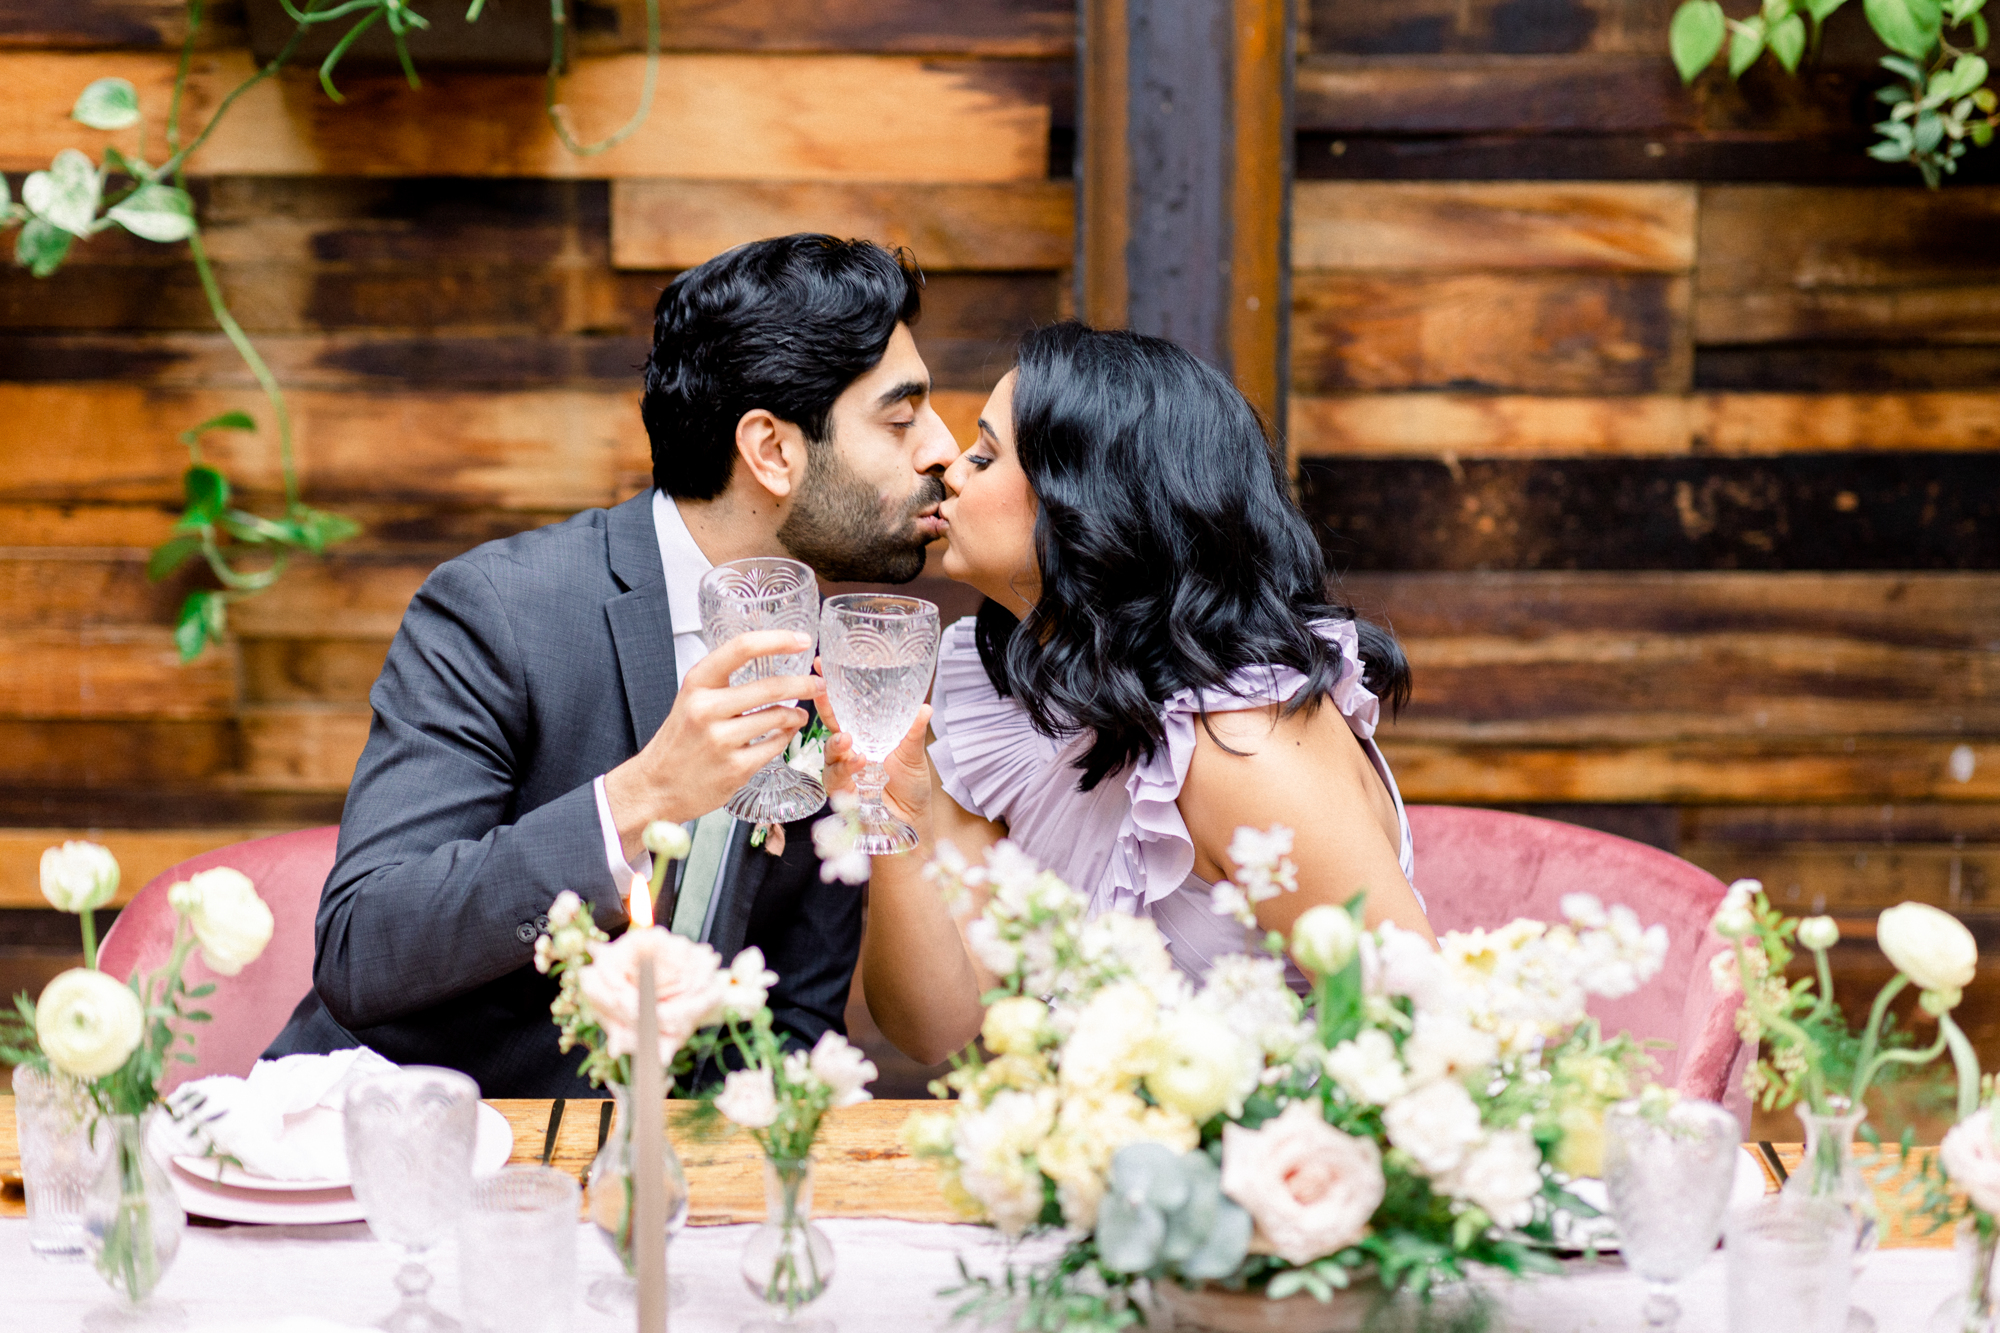 Stunning Brooklyn Winery Wedding Photography Inspiration with Rustic Elements